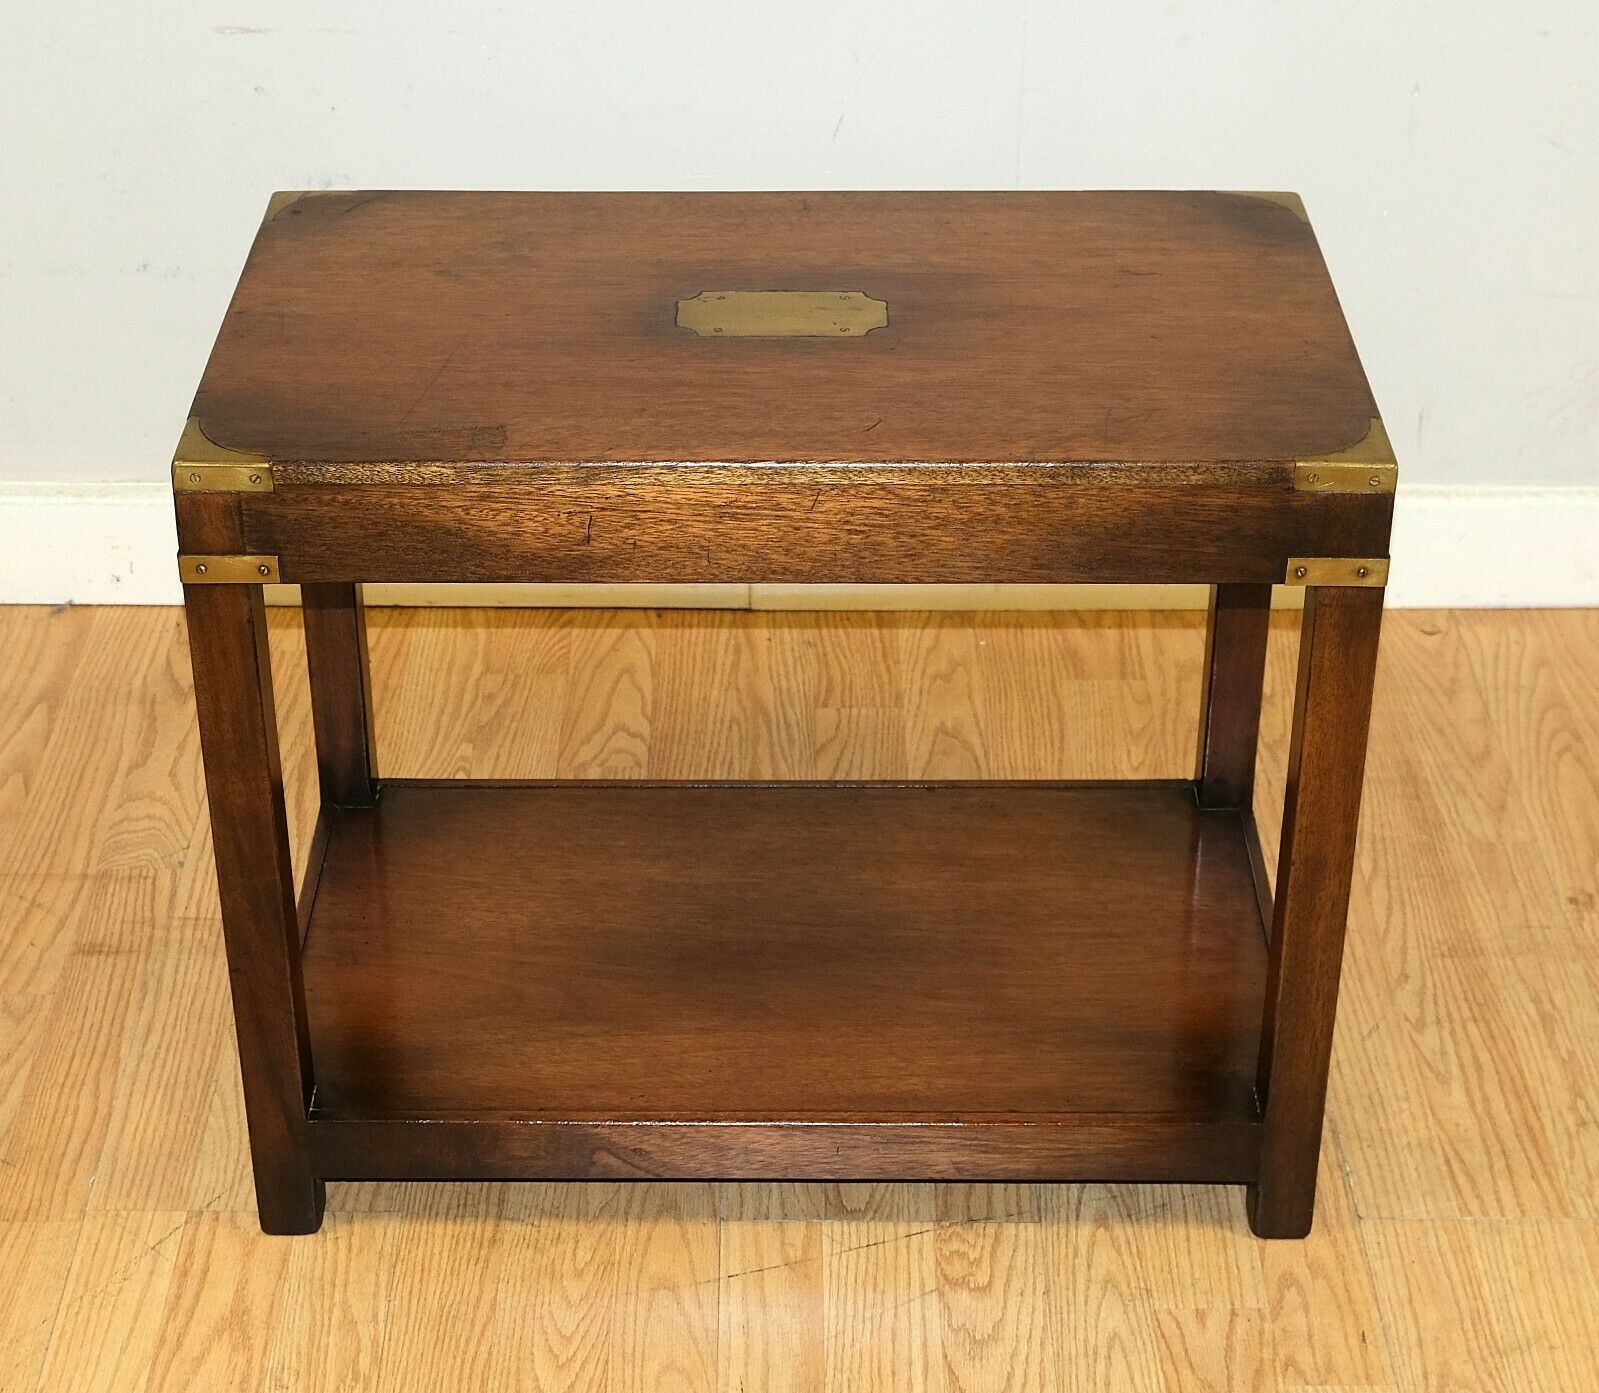 Lovely Kennedy Campaign Hardwood Side Table Brass Inset on Top & Single Shelf